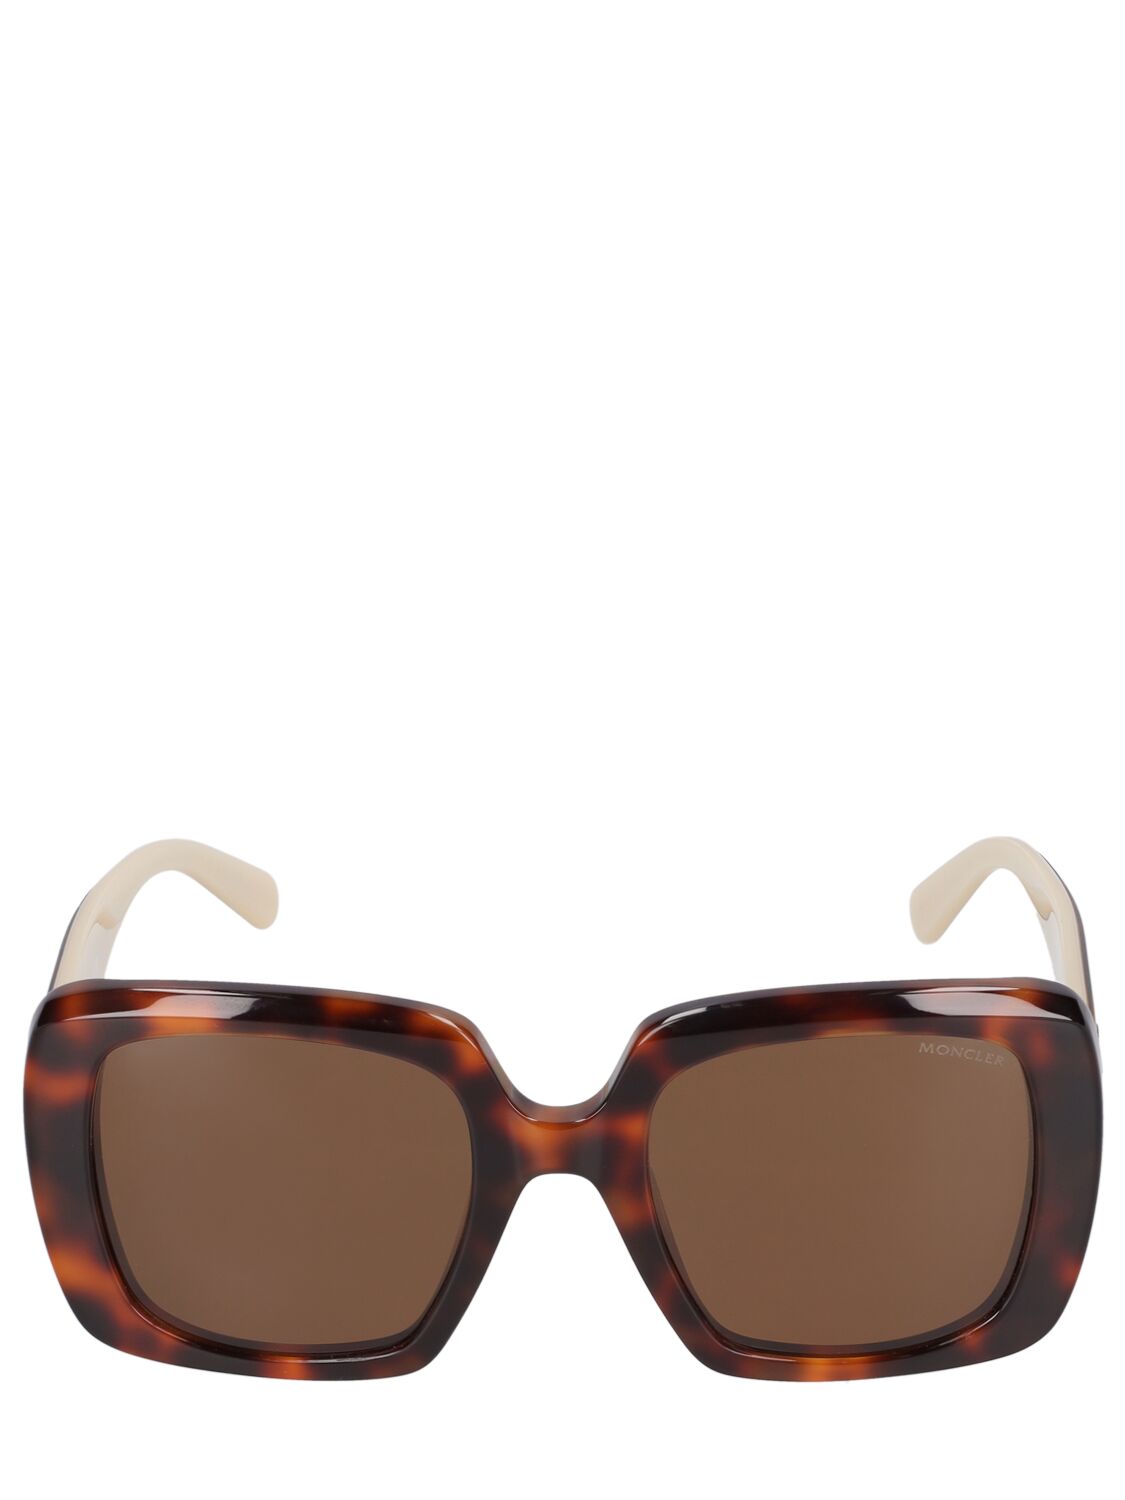 Moncler Blanche Acetate Squared Sunglasses In Havana Brown